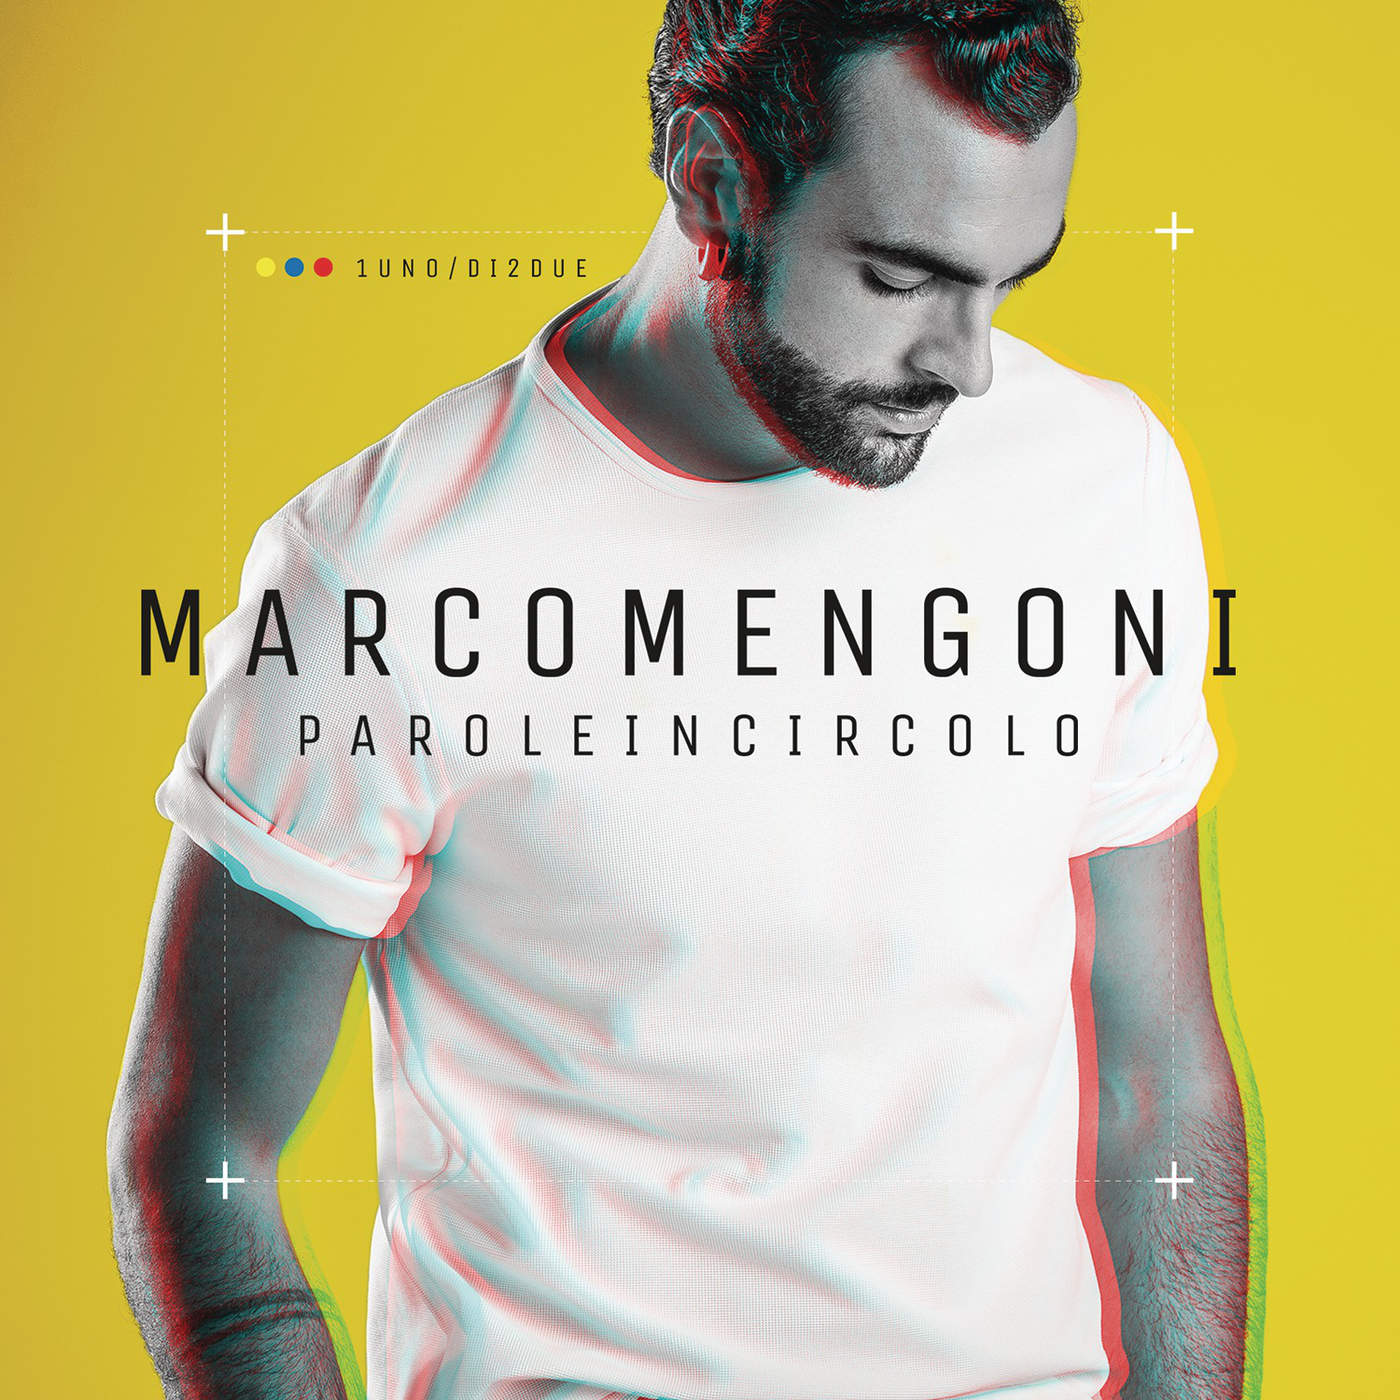 Marco Mengoni - Parole in circolo (Special Edition) (2015) [iTunes Plus AAC M4A] + FLAC-新房子